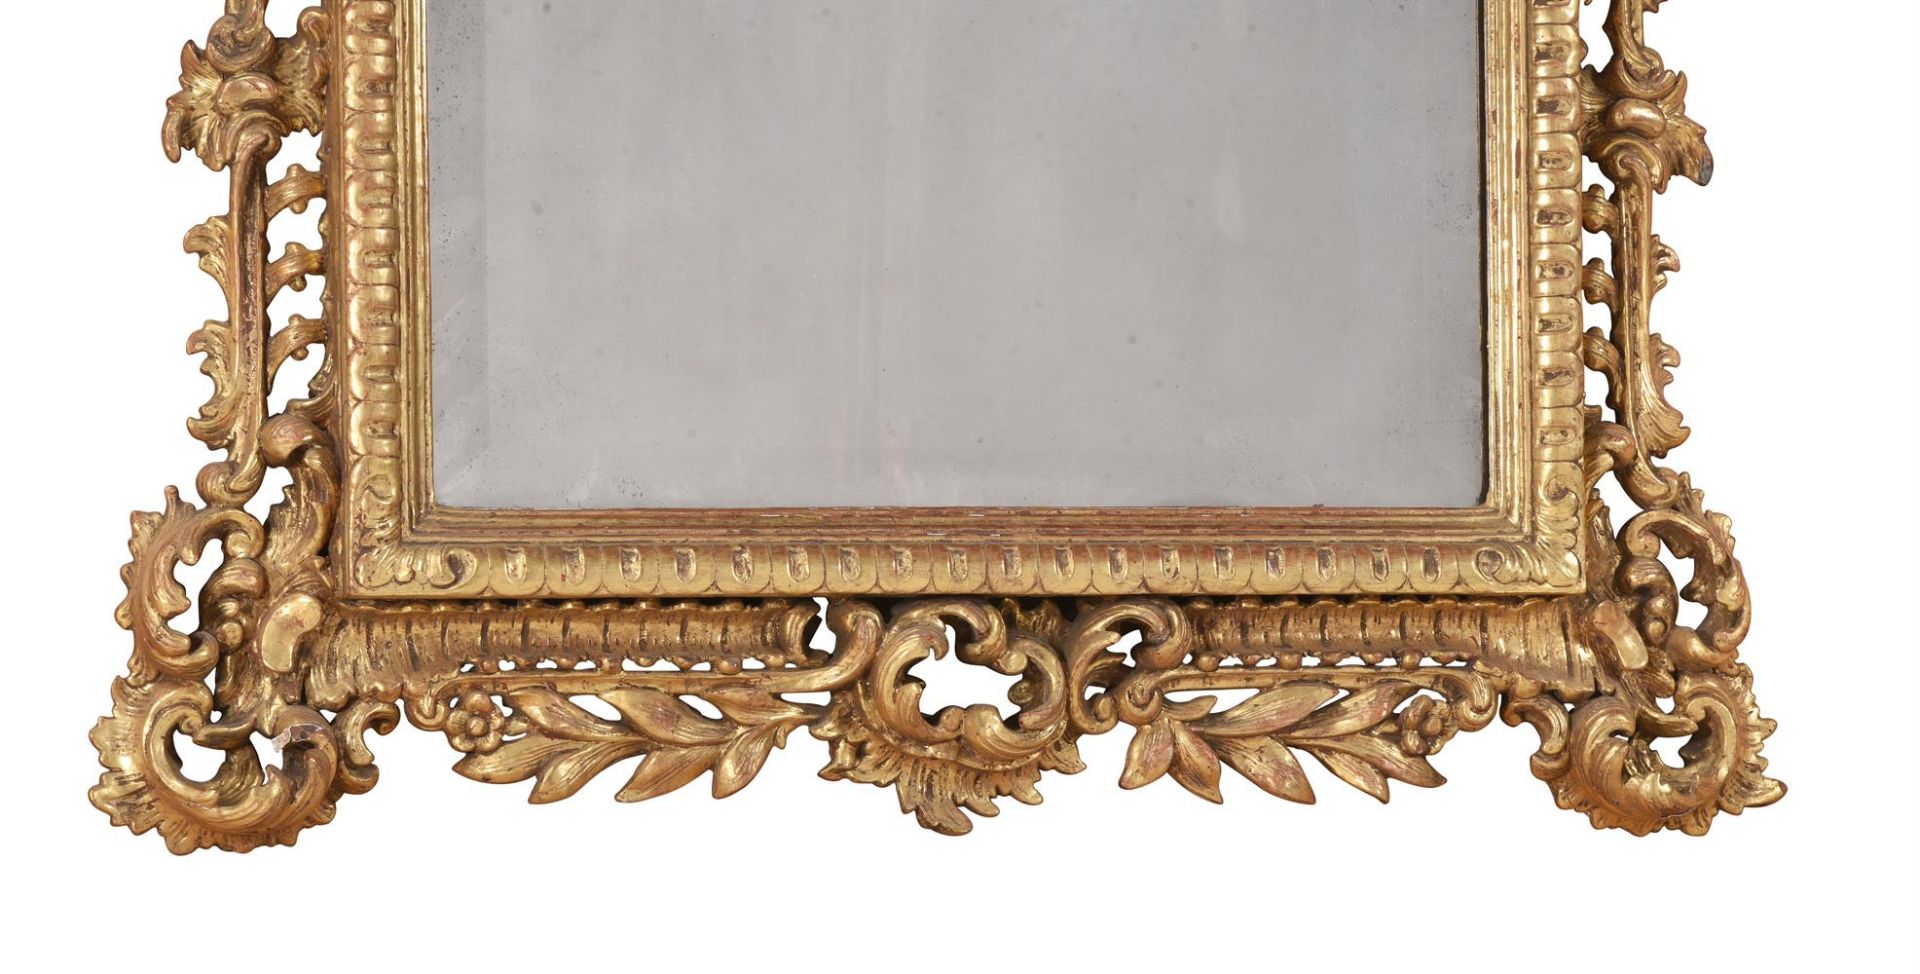 A CONTINENTAL CARVED GILTWOOD MIRROR, POSSIBLY ITALIAN, 19TH CENTURY - Image 3 of 4